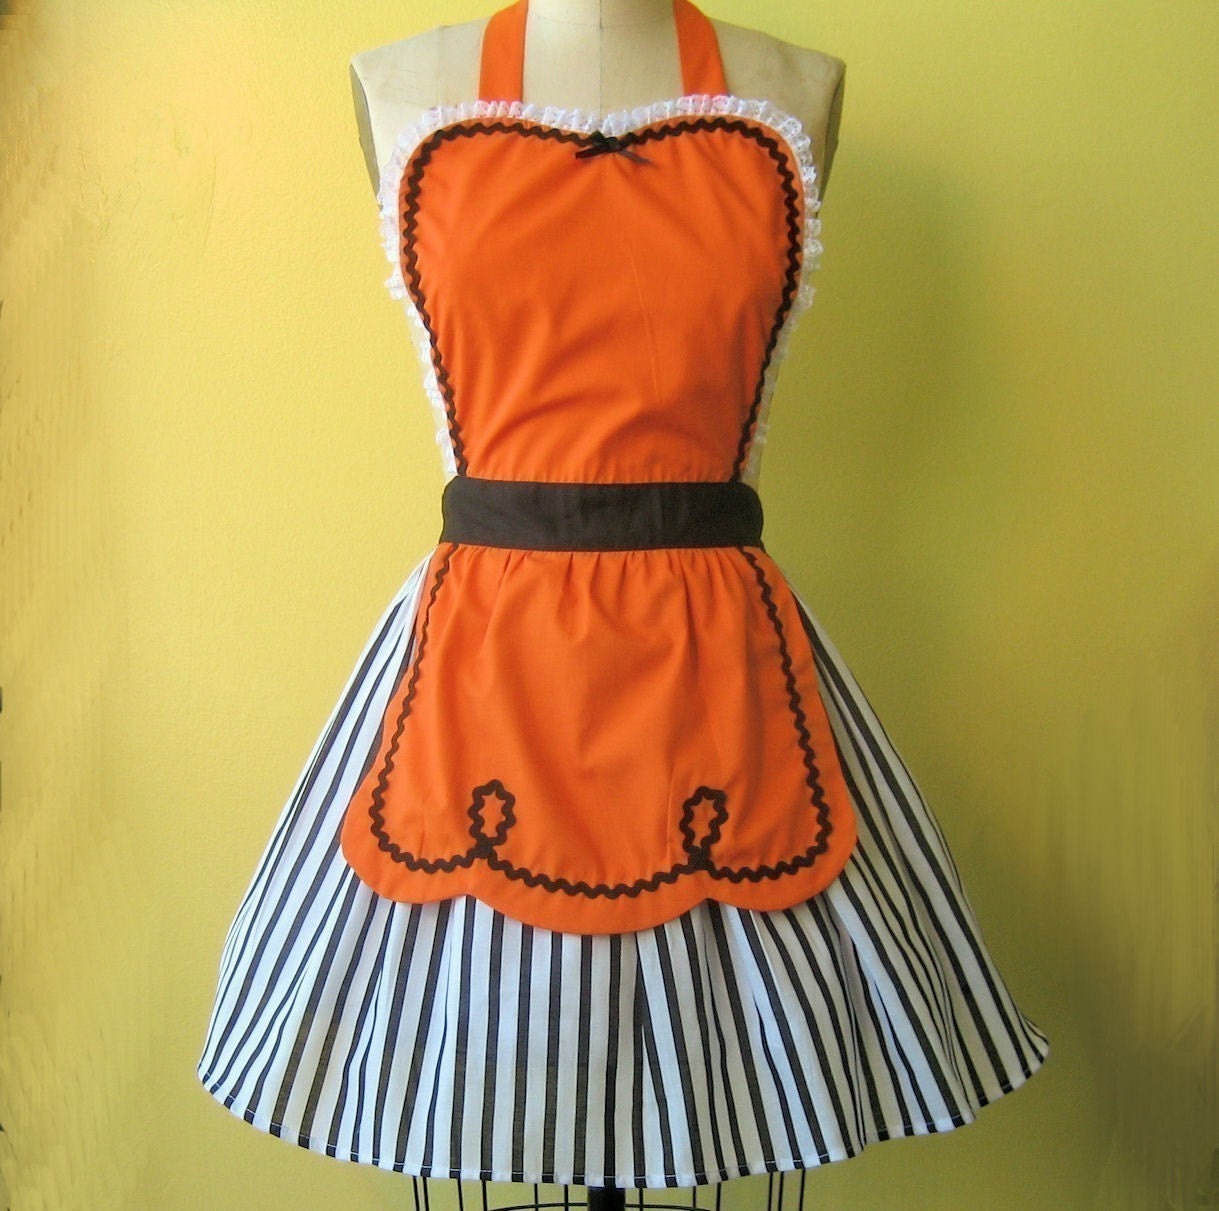 retro ORANGE and BLACK full apron 50s DINER WAITRESS ......  ice cream parlor with fifties details make a sexy hostess or bridal shower gift and is vintage inspired womens flirty Thanksgiving Harvest aprons